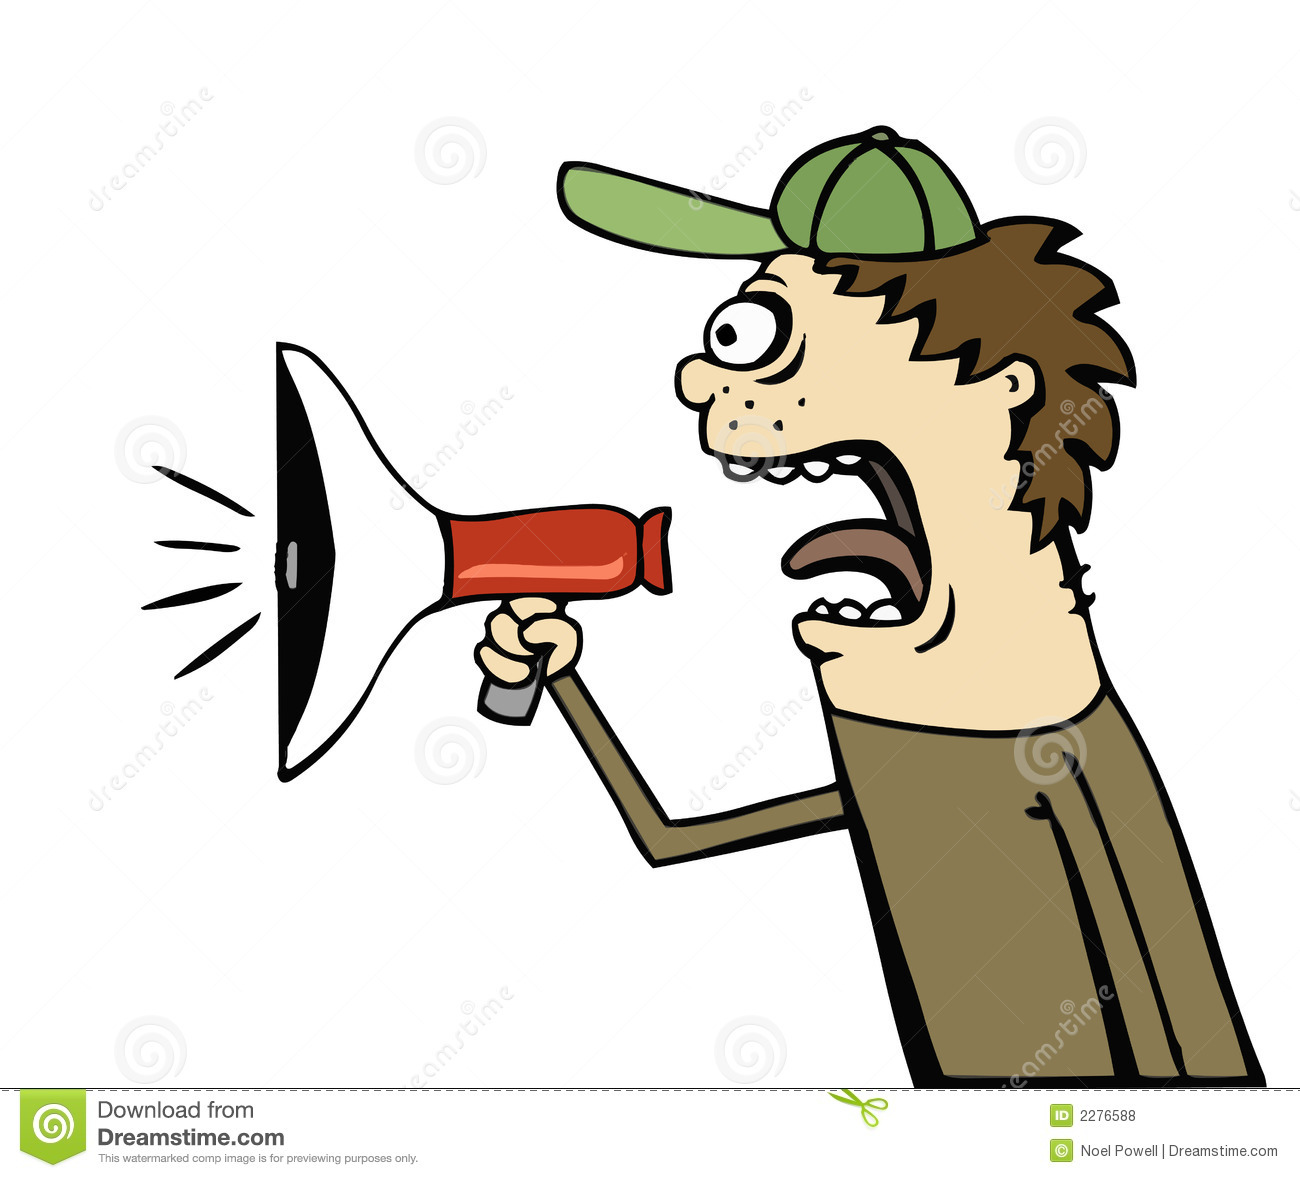 Profile Of A Cartoon Guy Yelling Into A Bullhorn Against A White